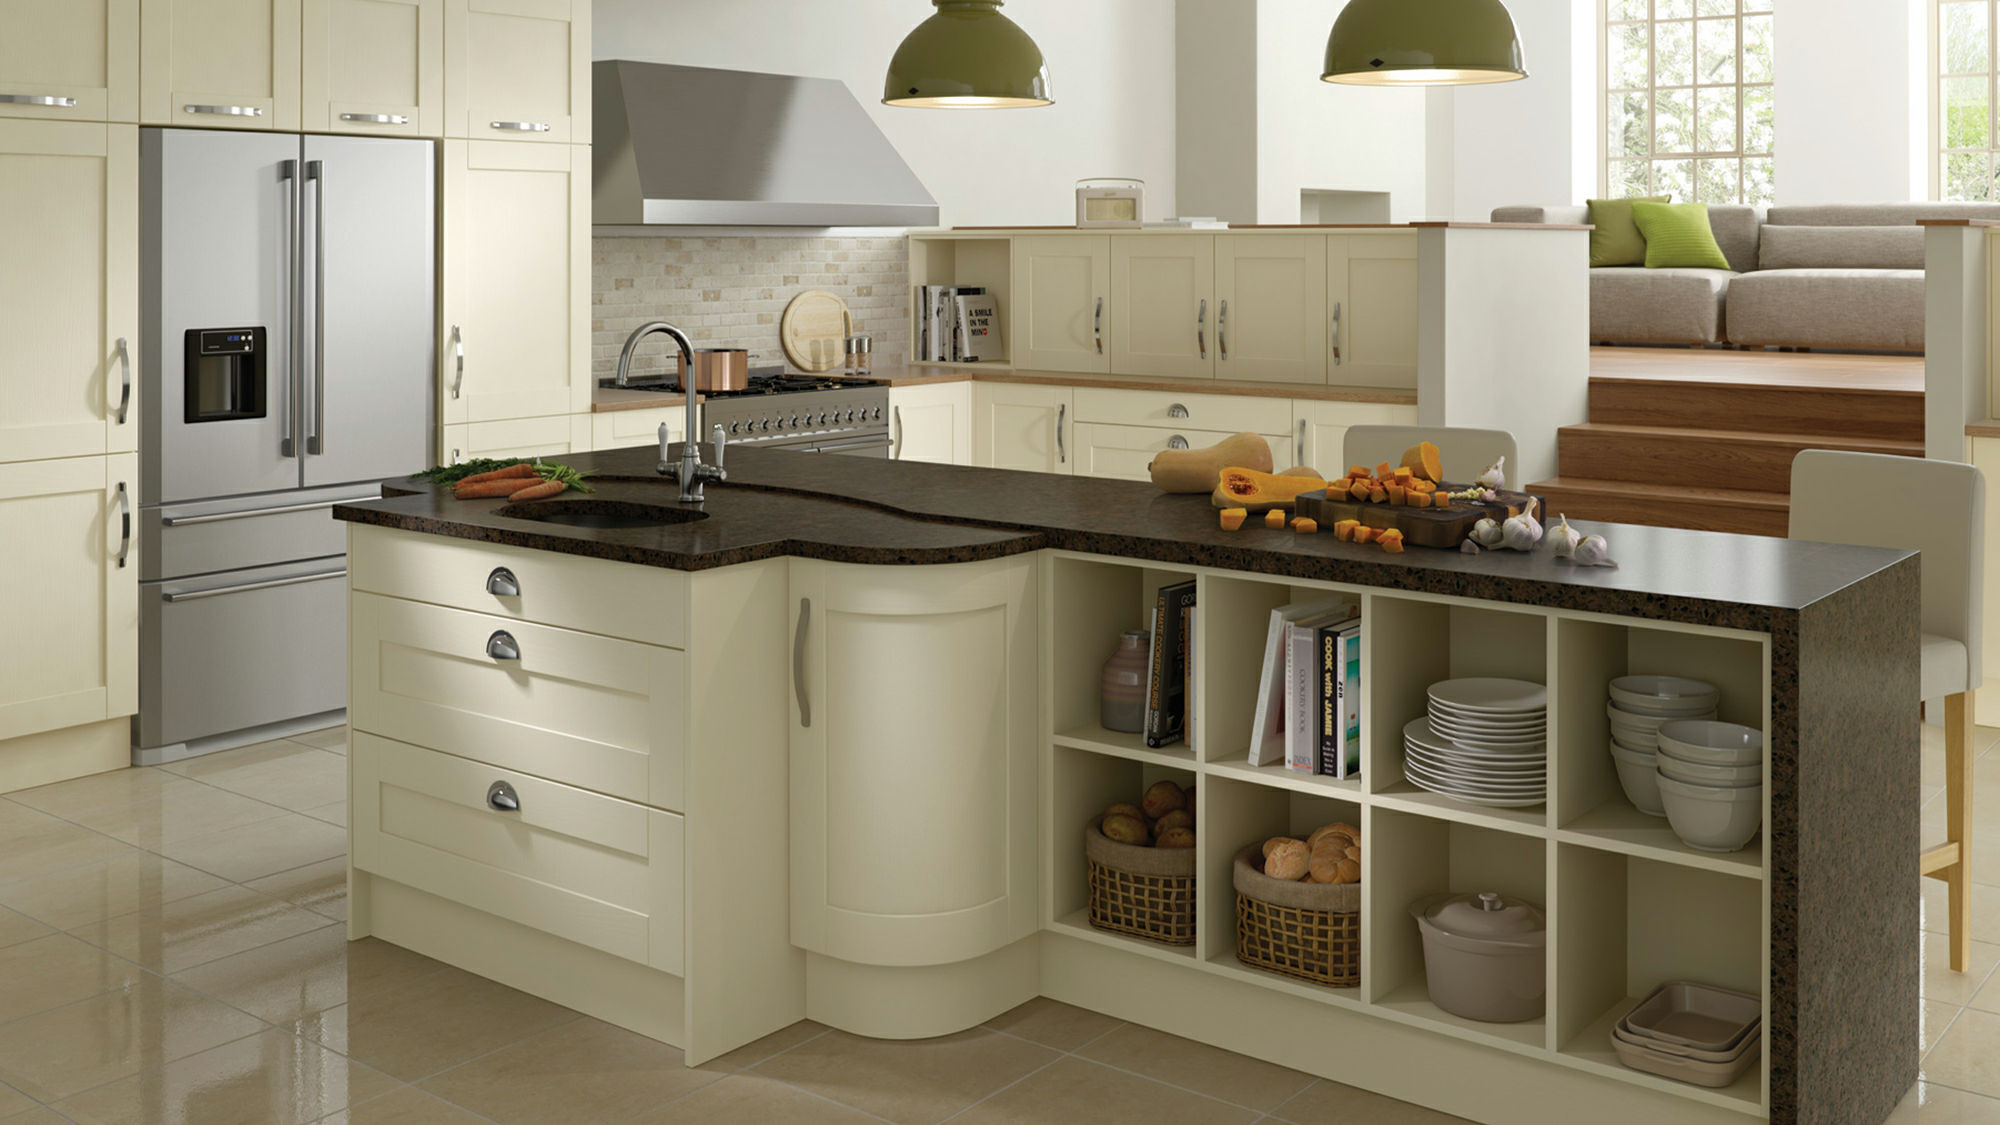 Elegant Madison solid wood ivory kitchen with a durable build and classic design, perfect for a refined home